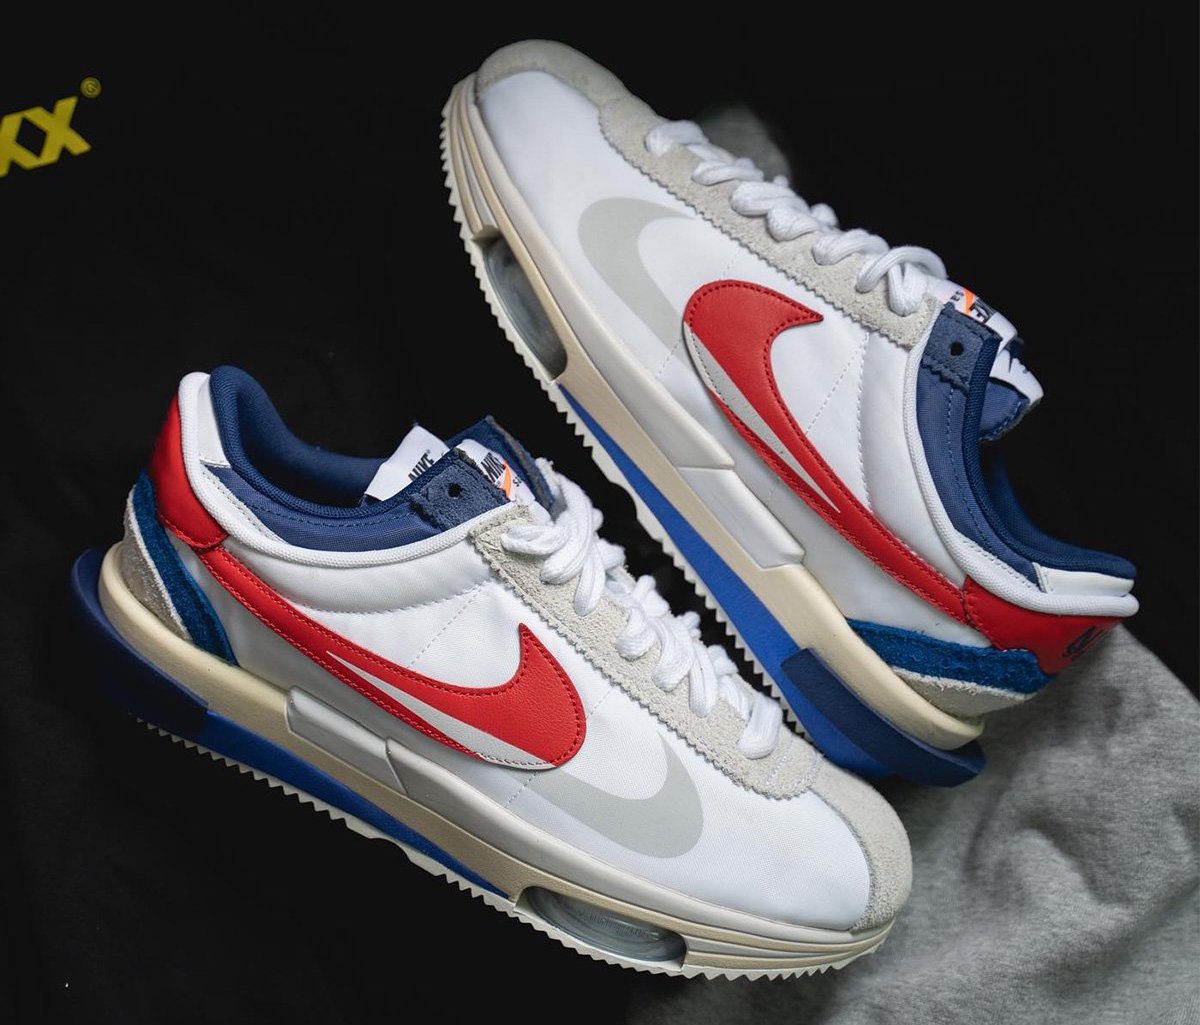 Full Look At The Sacai x Nike Cortez Collaboration